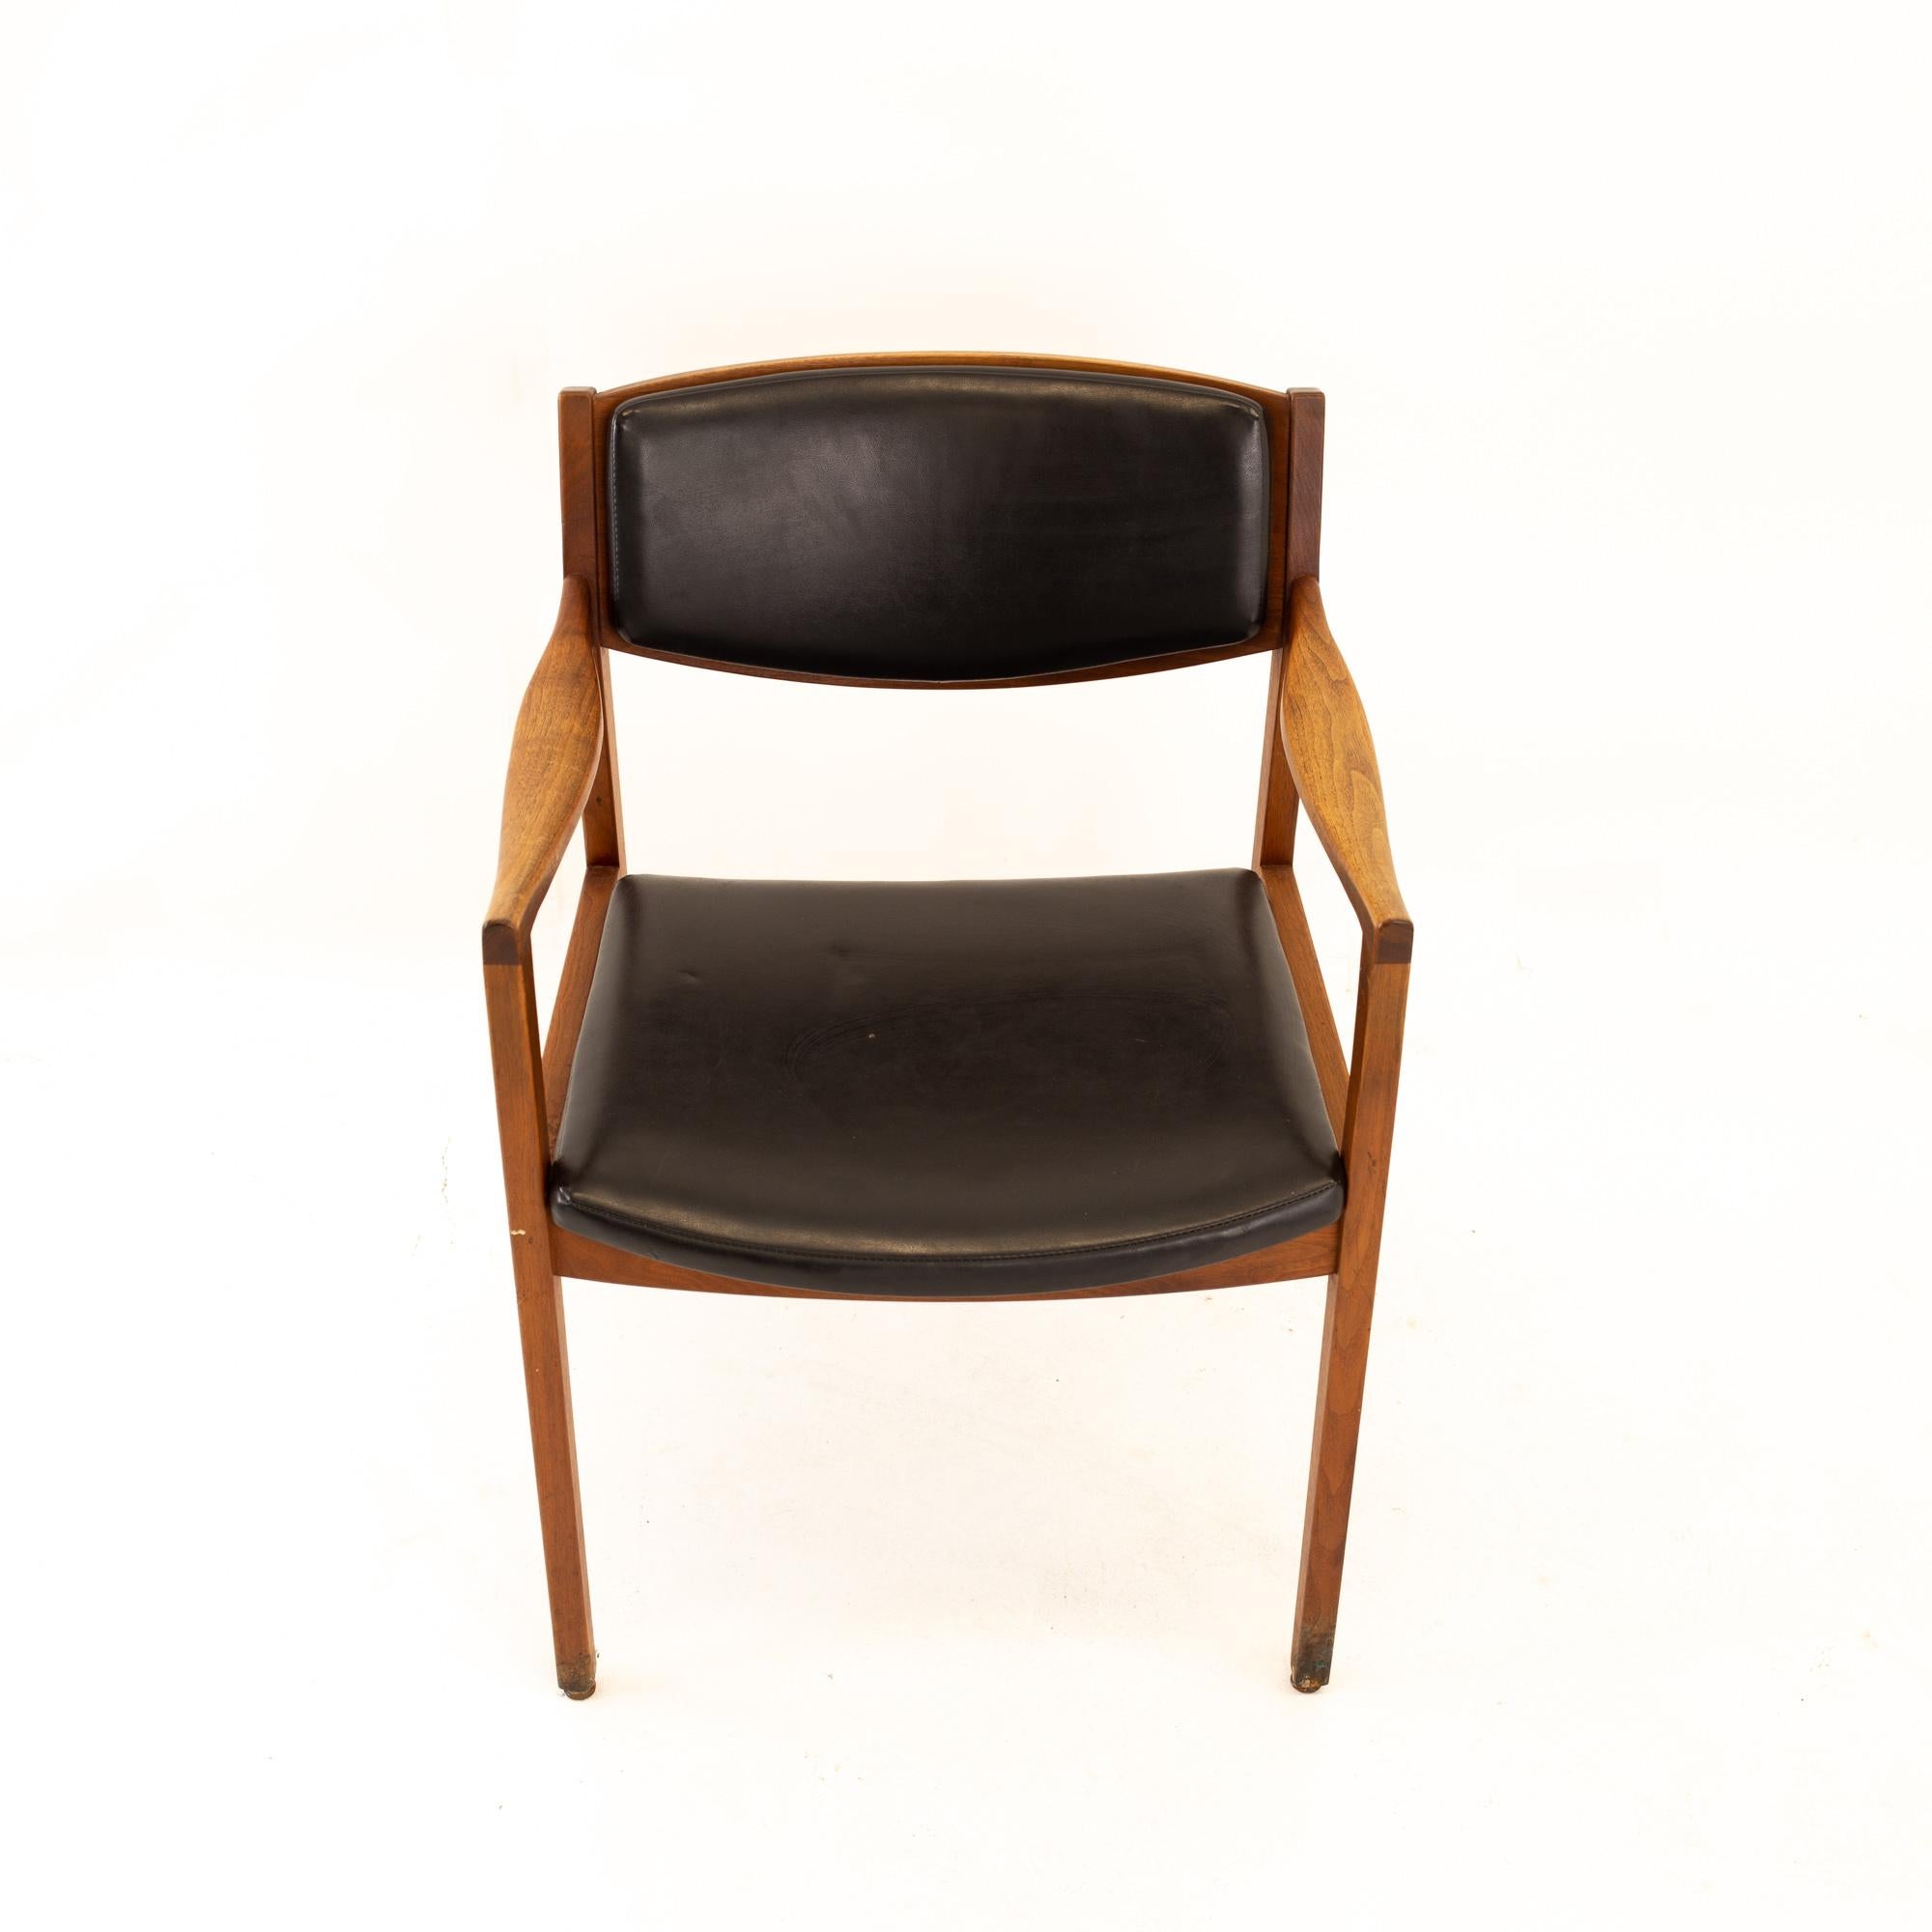 Upholstery Gunlocke Midcentury Walnut and Black Leather Occassional Chairs, Pair